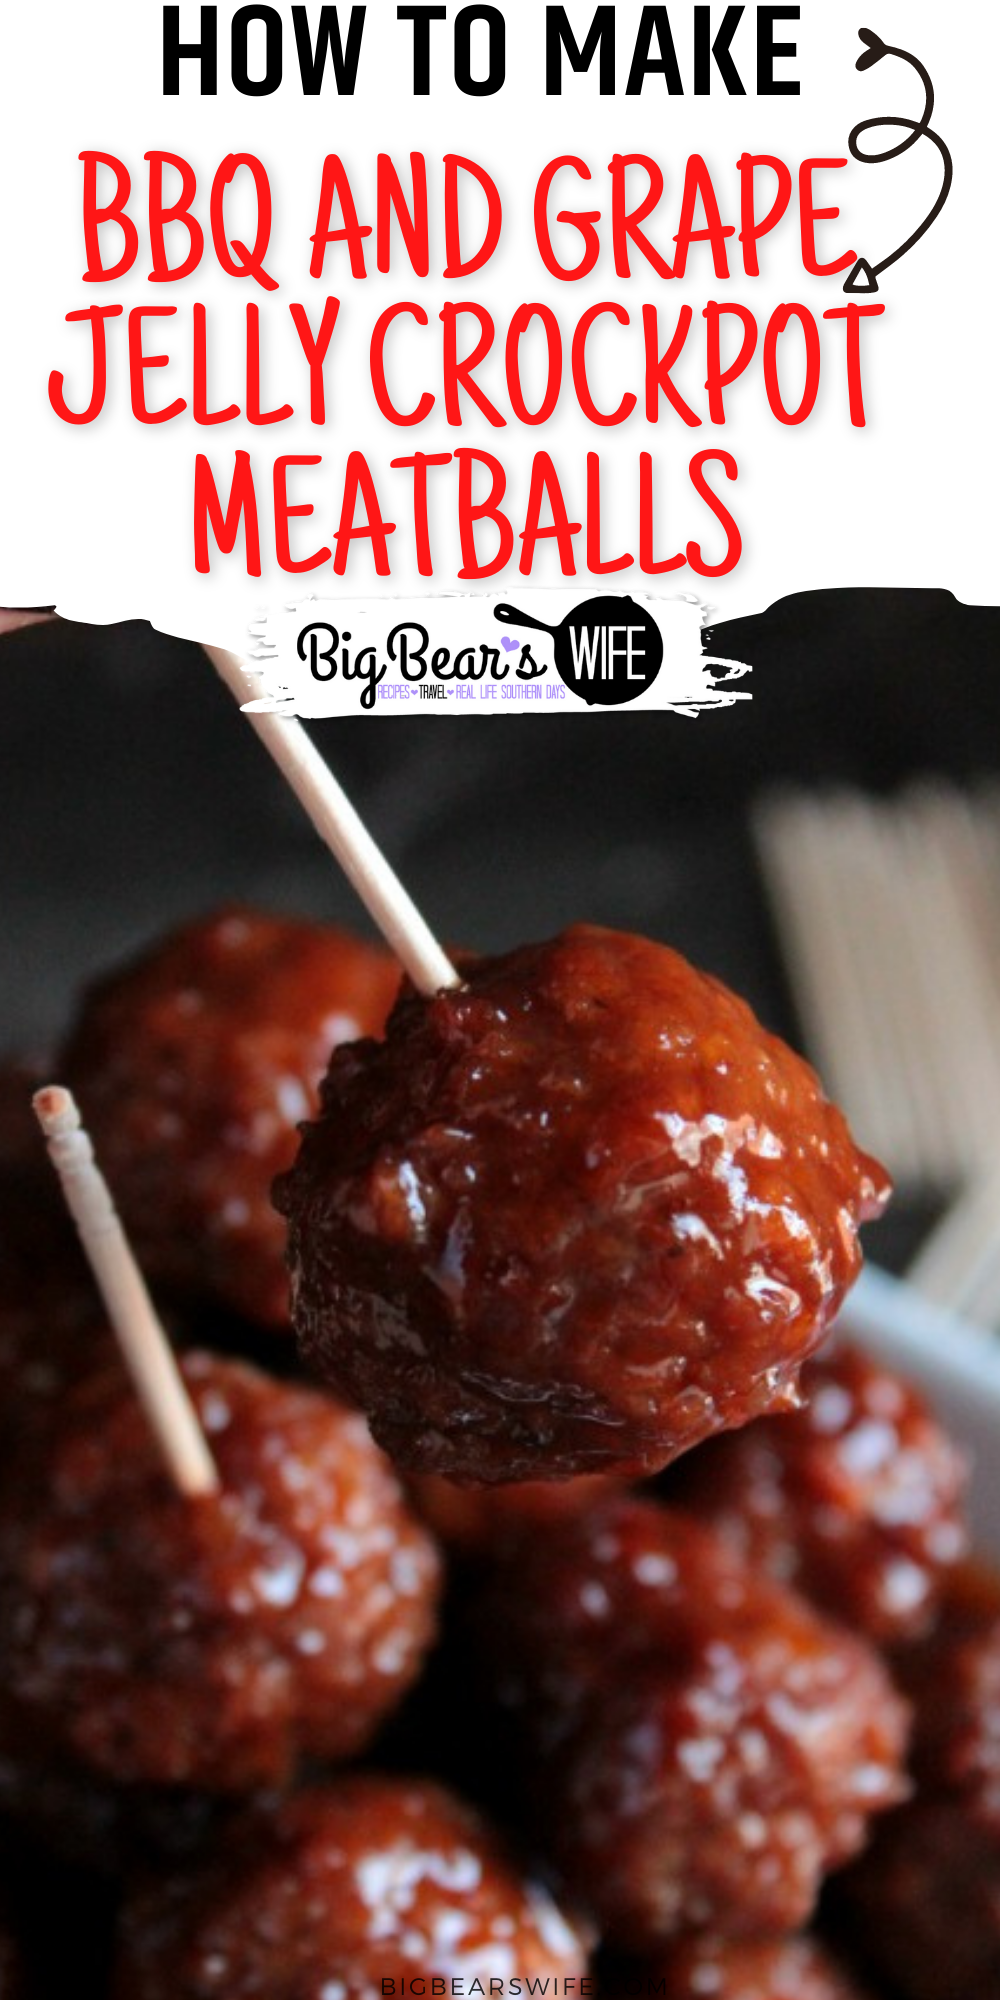 BBQ and Grape Jelly Crockpot Meatballs - a Holiday classic that we love to make each year! Meatballs slow cooked in grape jelly and BBQ sauce! - These super popular BBQ and Grape Jelly Crockpot Meatballs are always a hit at Thanksgiving at Christmas! They're super easy to make and everyone always loves them! I had no idea how easy they were until my mom showed me how to make them!  via @bigbearswife